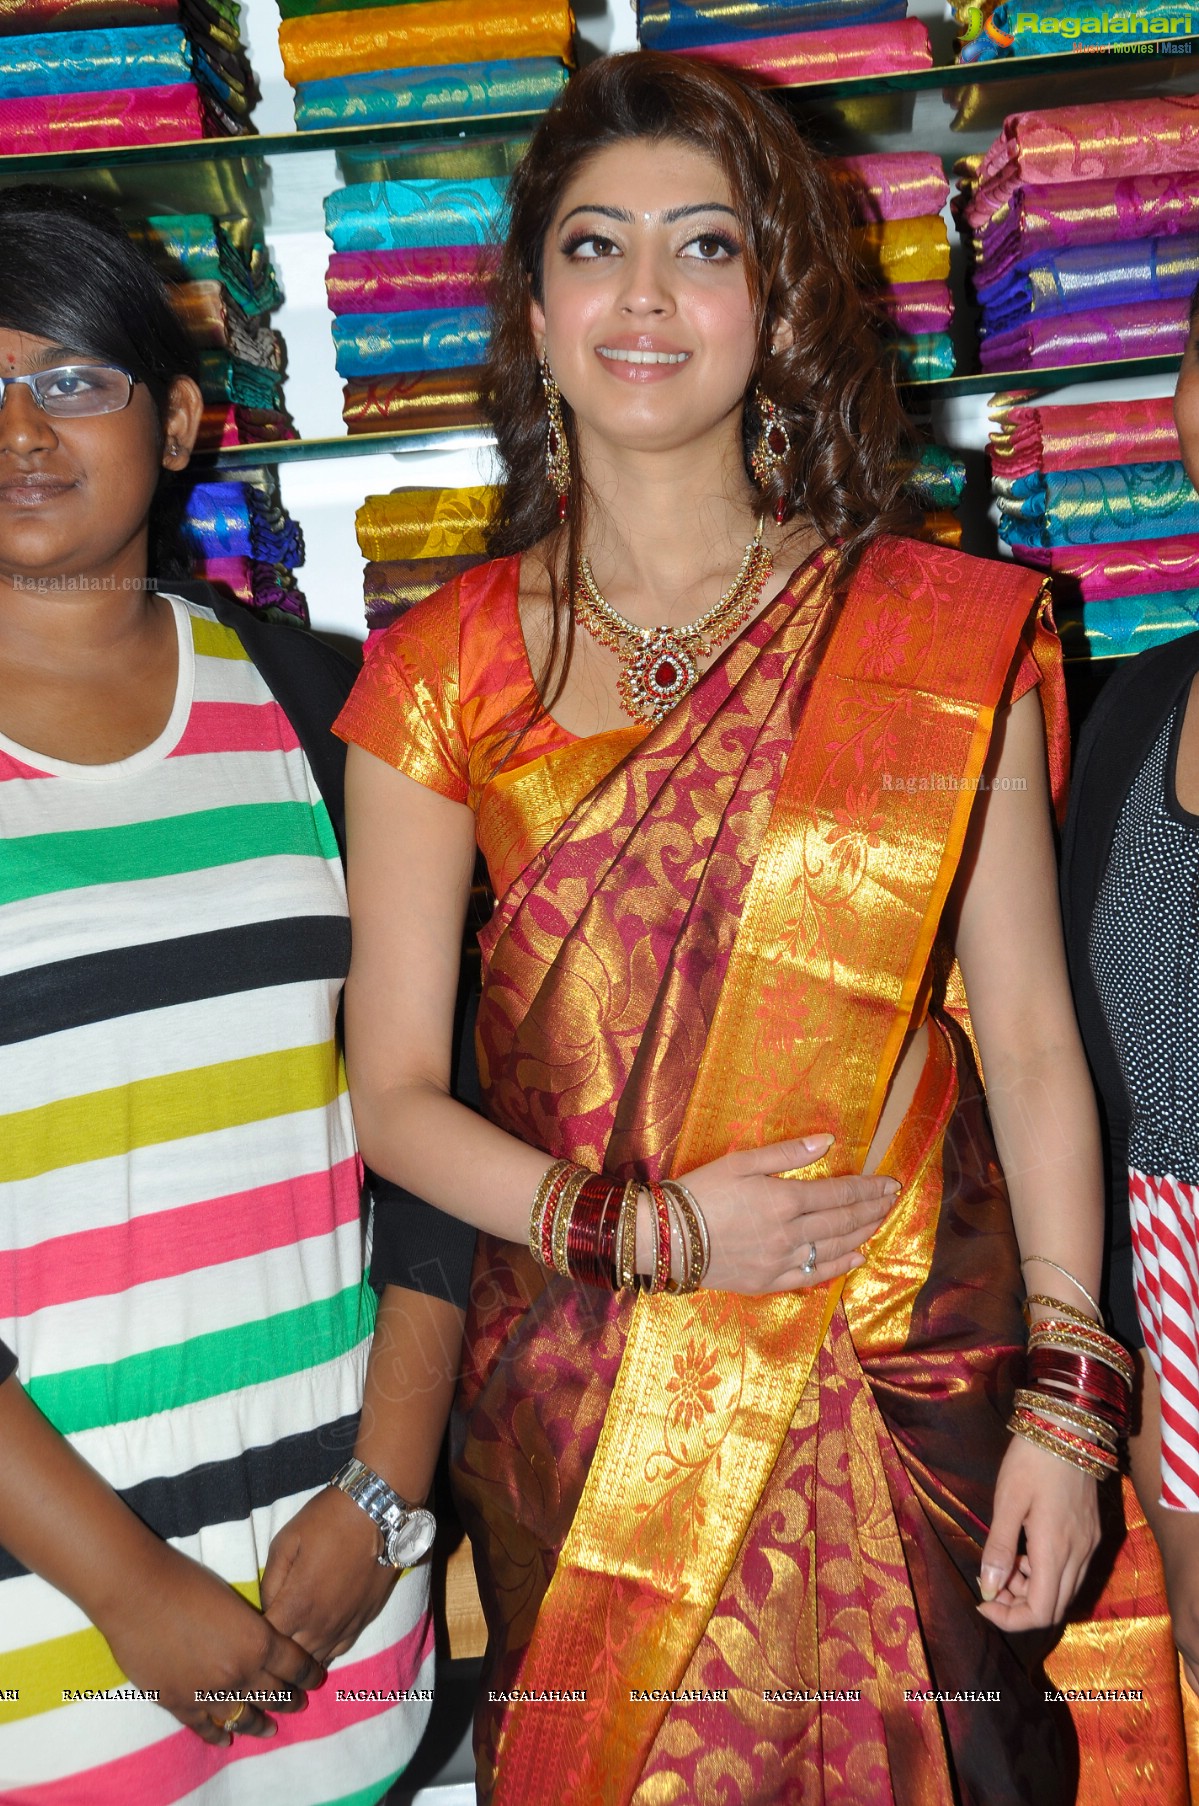 Pranitha Subhash launches RS Brothers at Ameerpet, Hyderabad